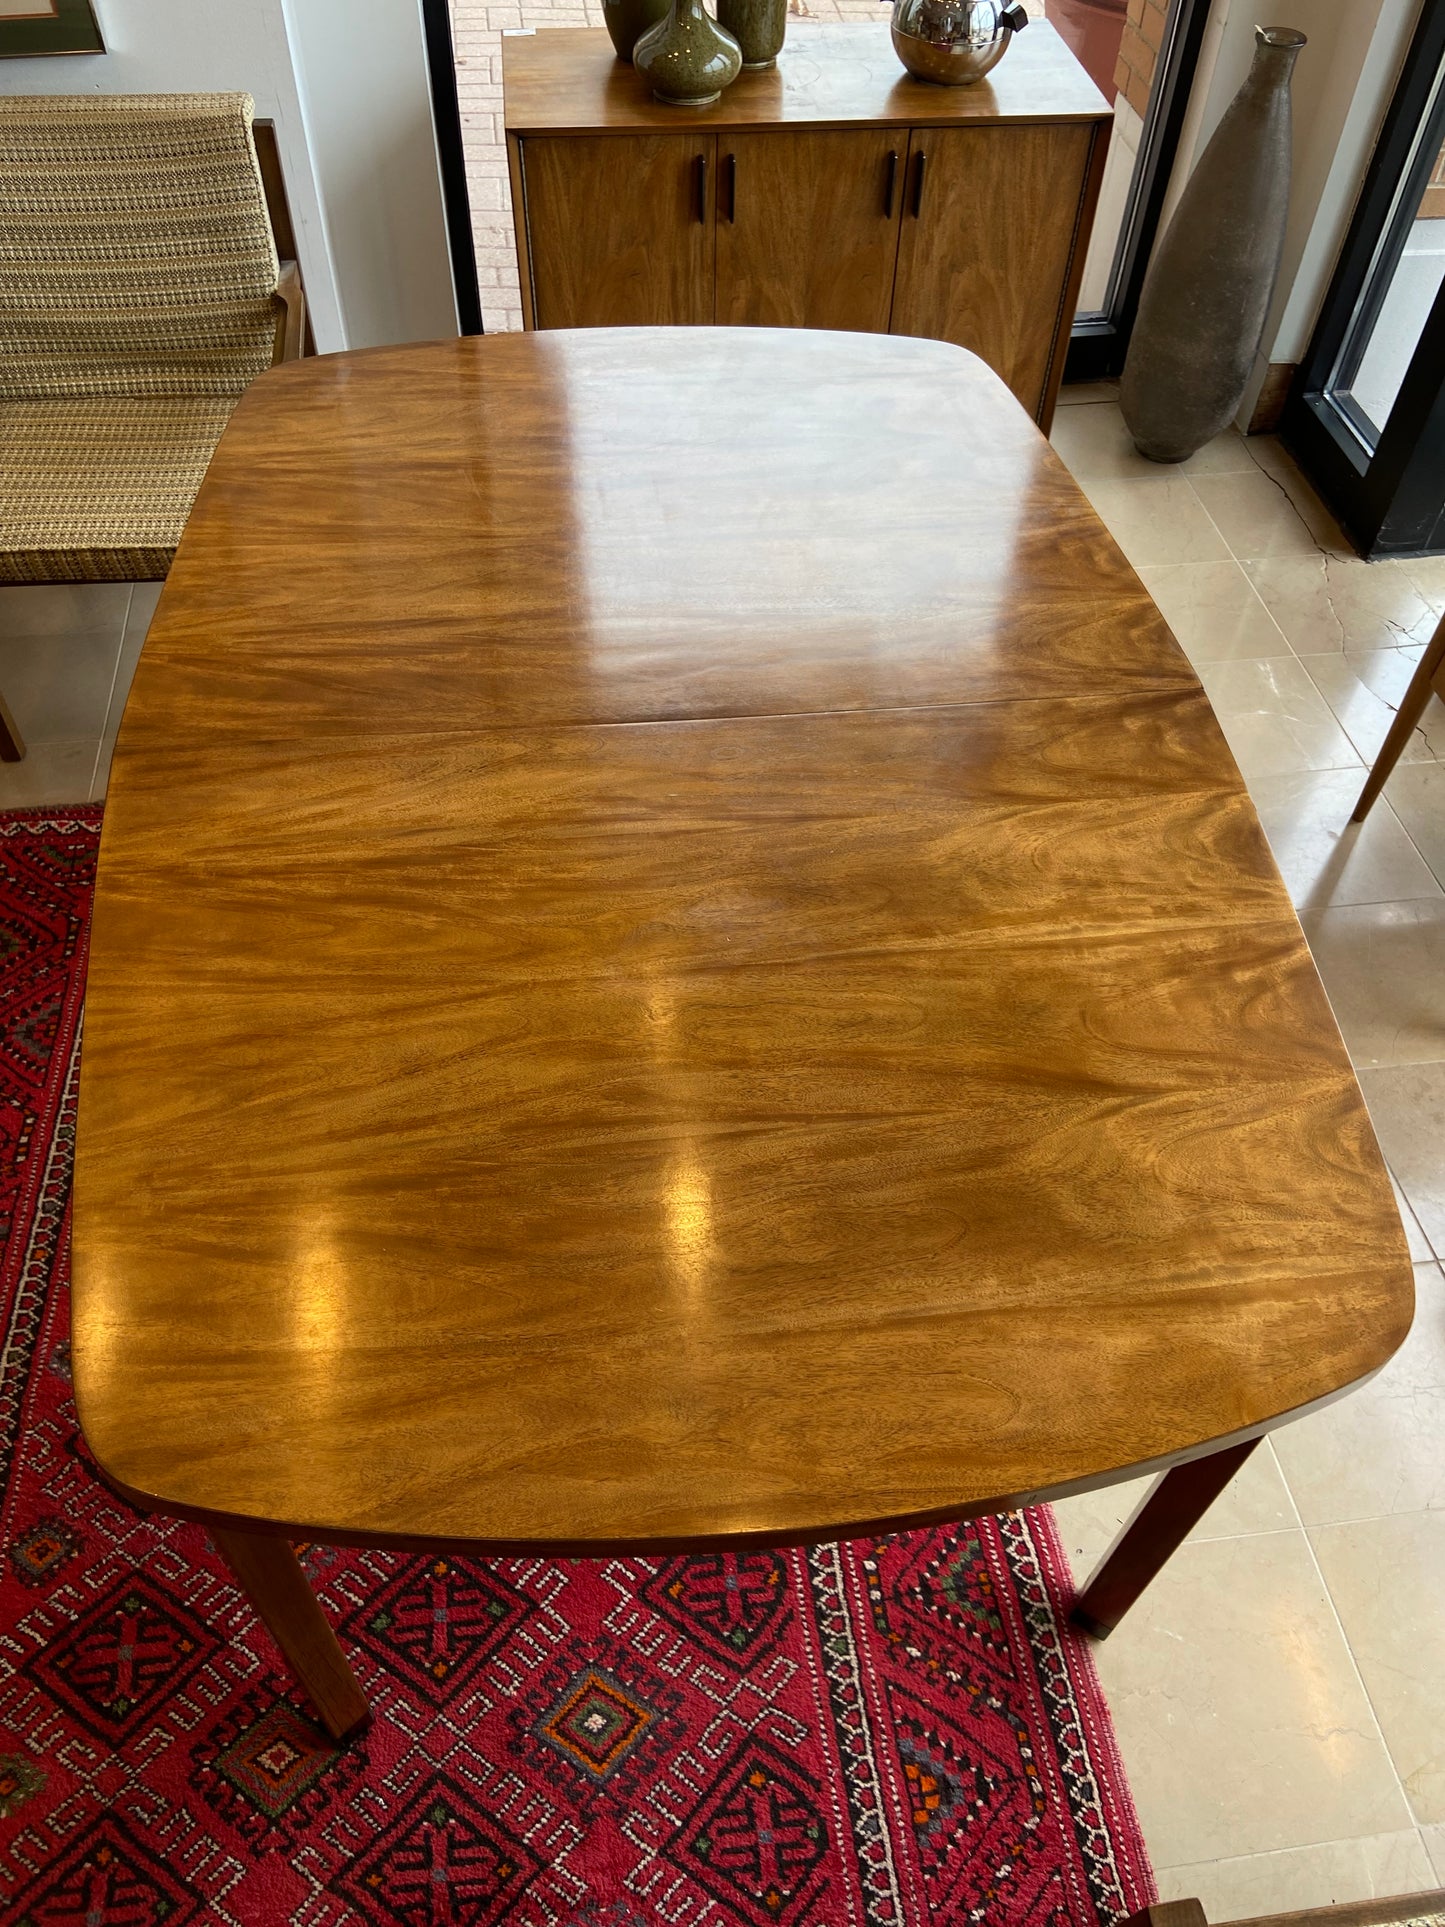 Lane Mid Century Table and Six Chairs (FDDG19)